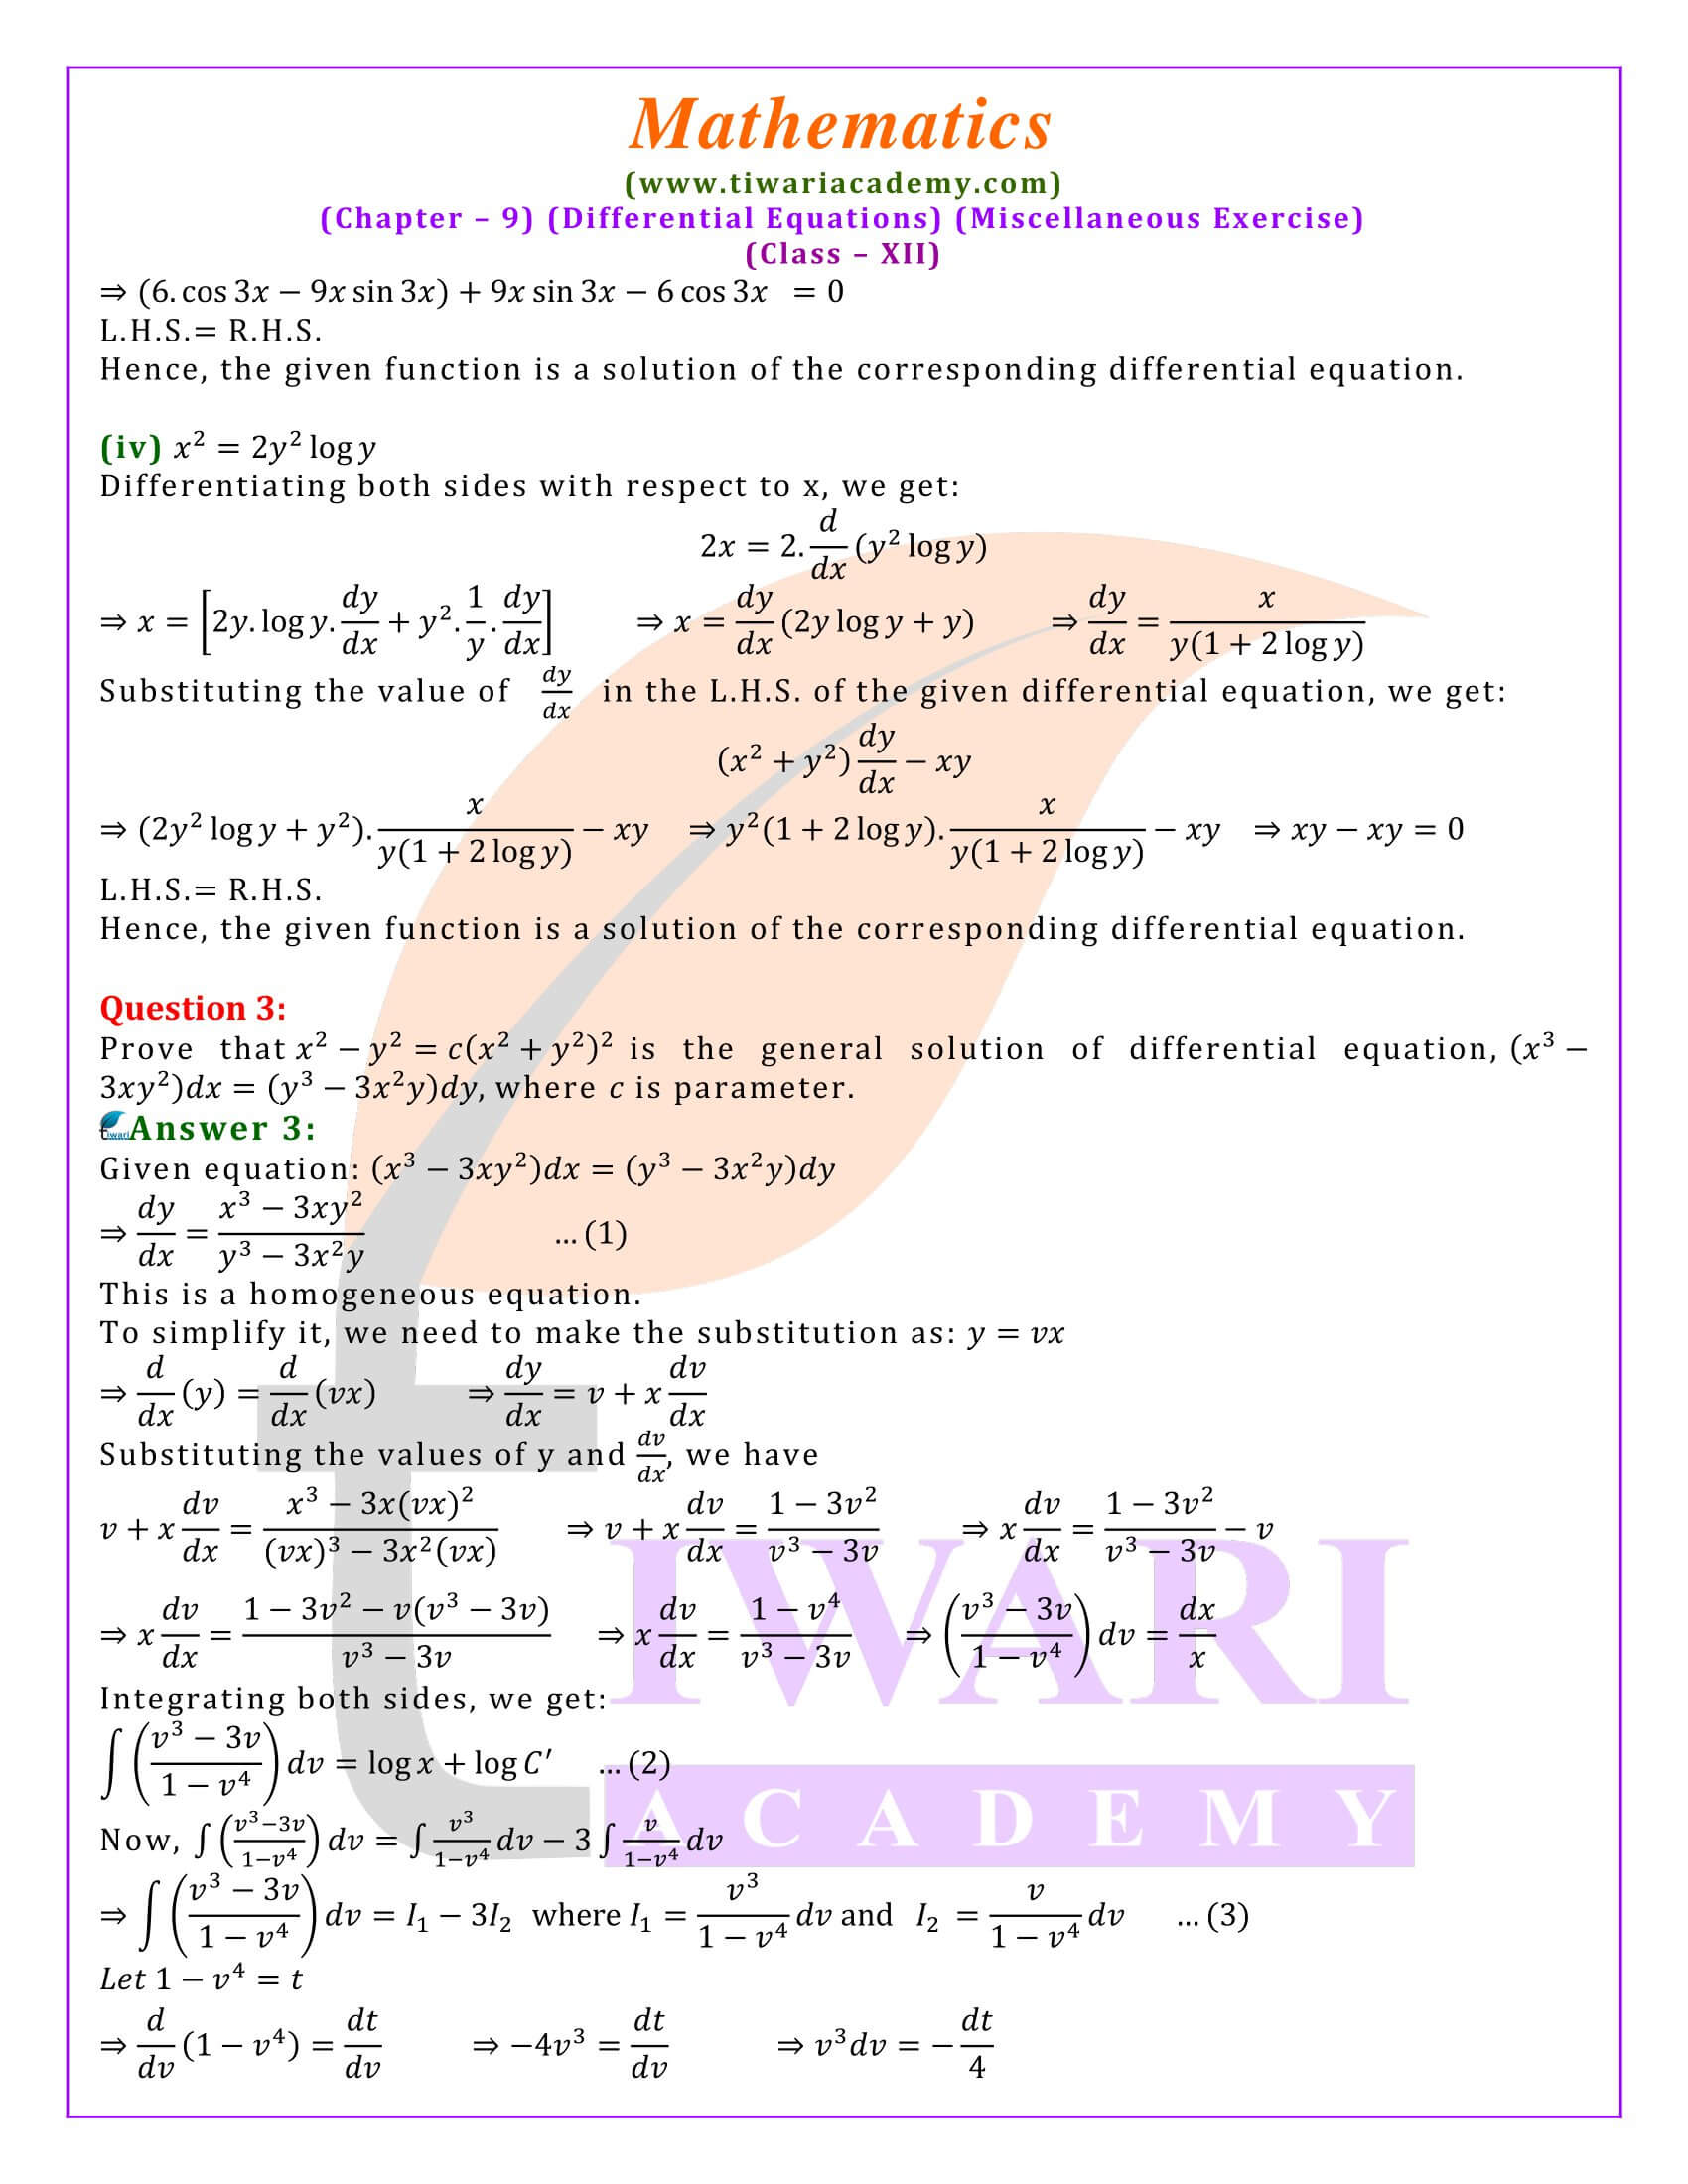 CBSE Class 12 Maths Chapter 9 Miscellaneous Exercise solutions